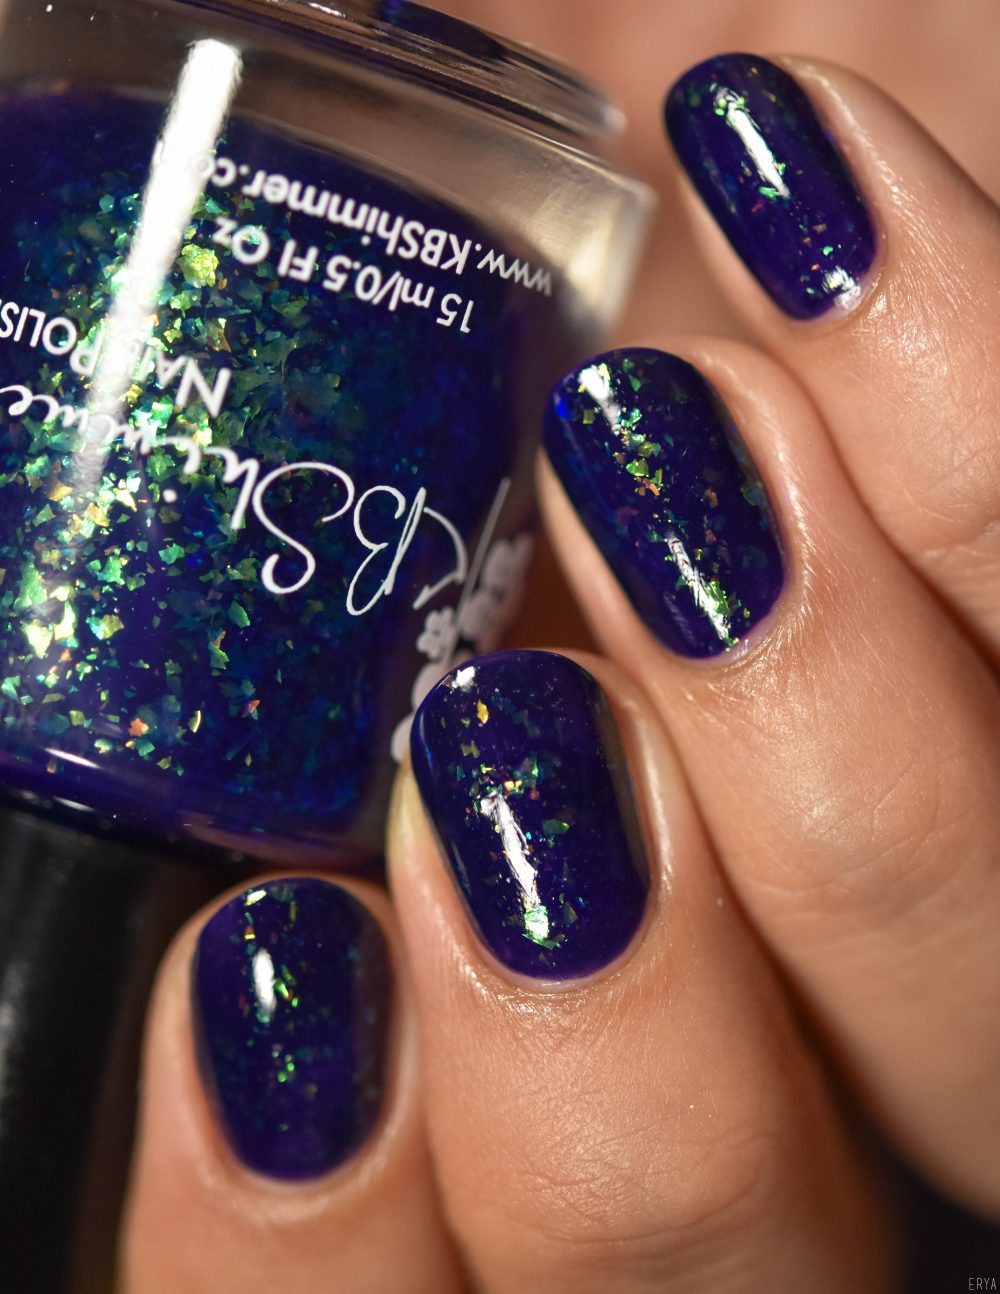 KBShimmer-Ready_For_This_Jelly-1